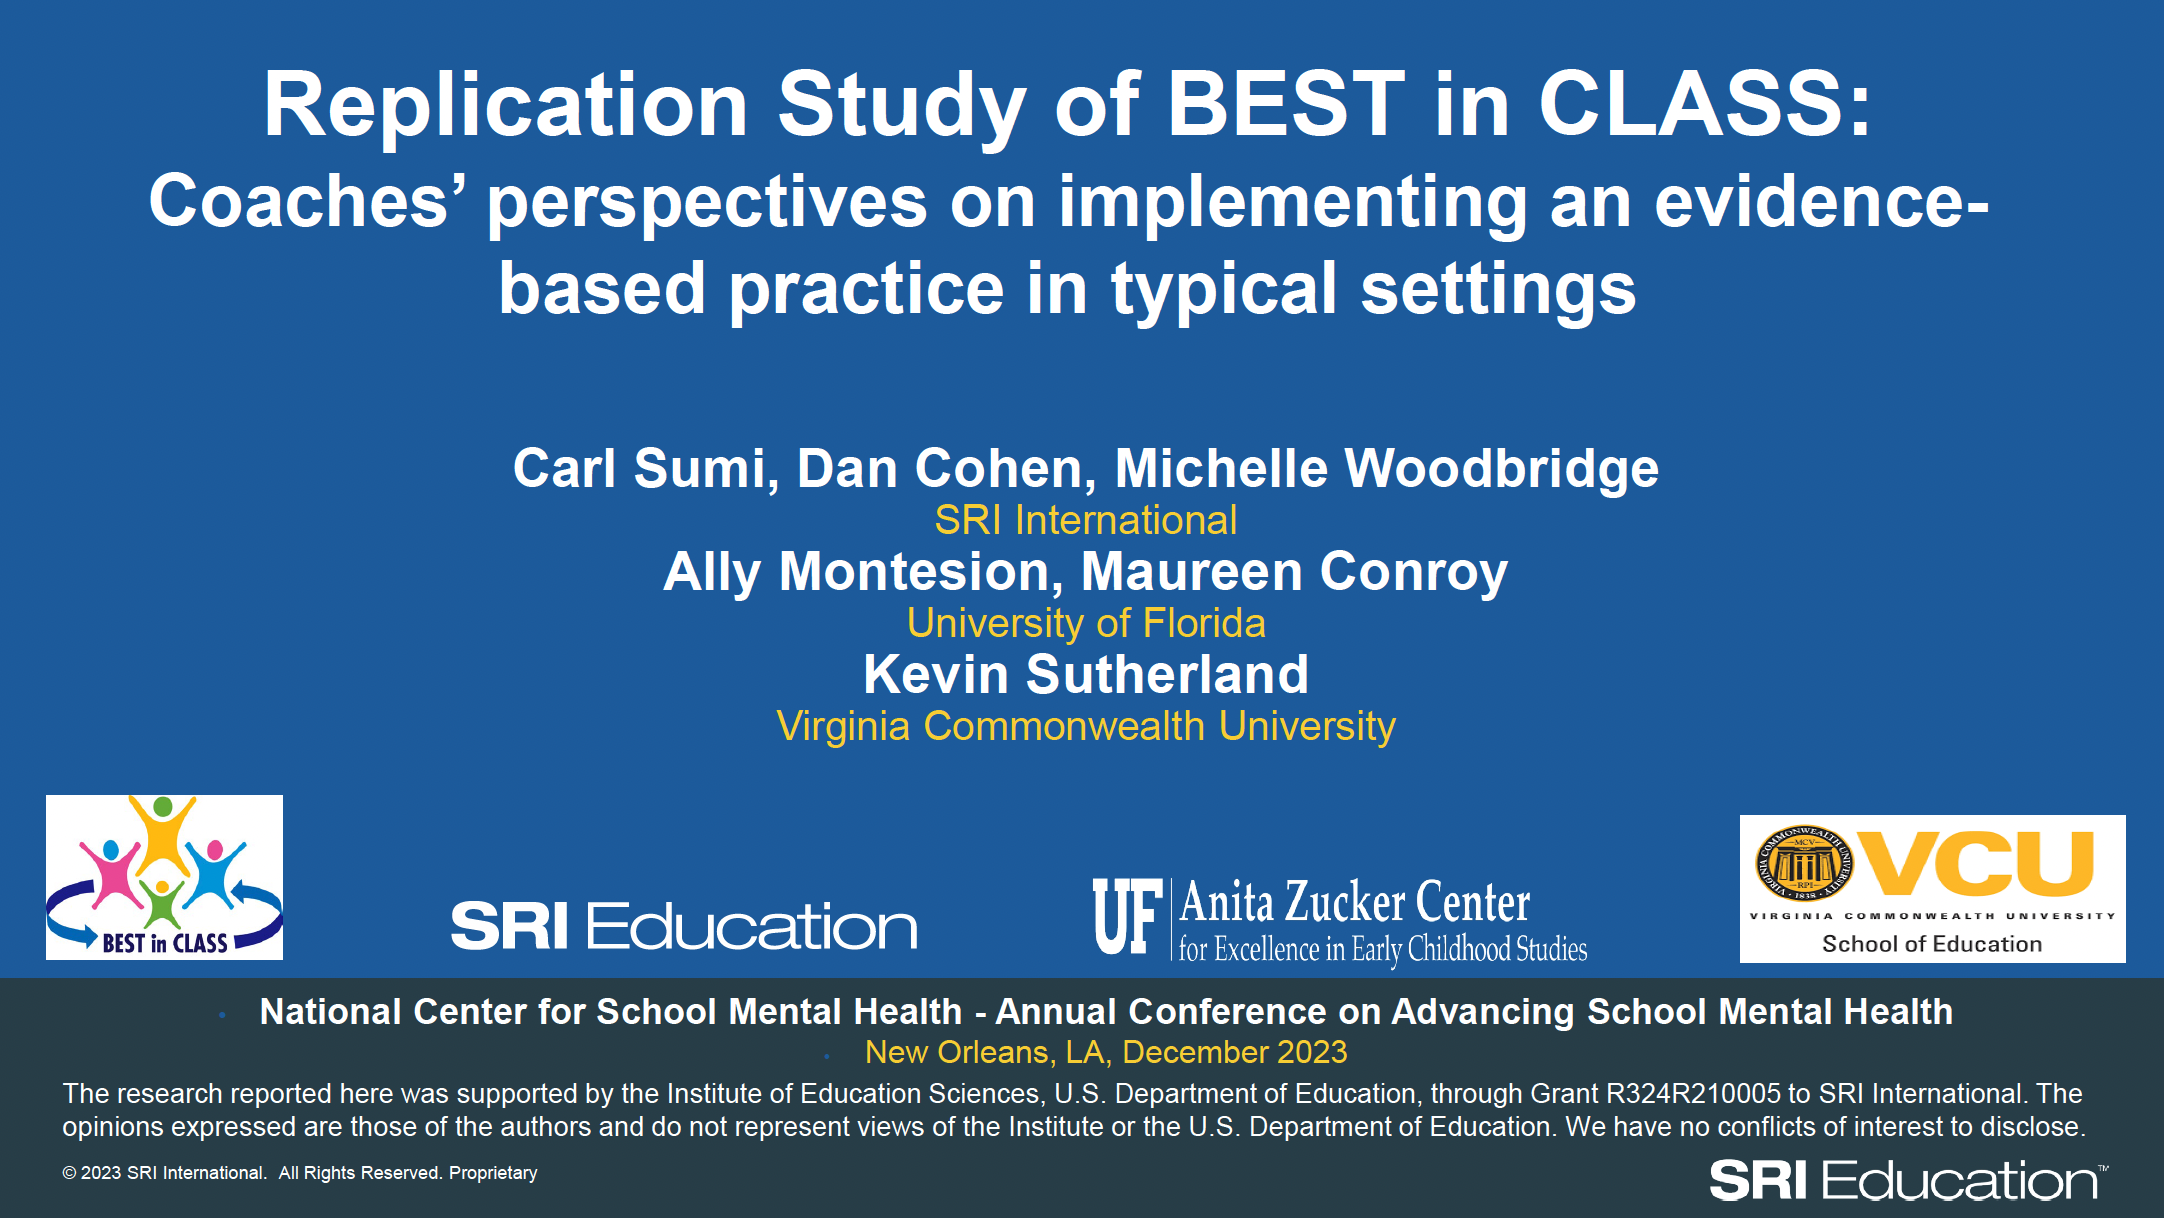 Replication Study of BEST in CLASS: Coaches’ perspectives on implementing an evidence-based practice in typical settings